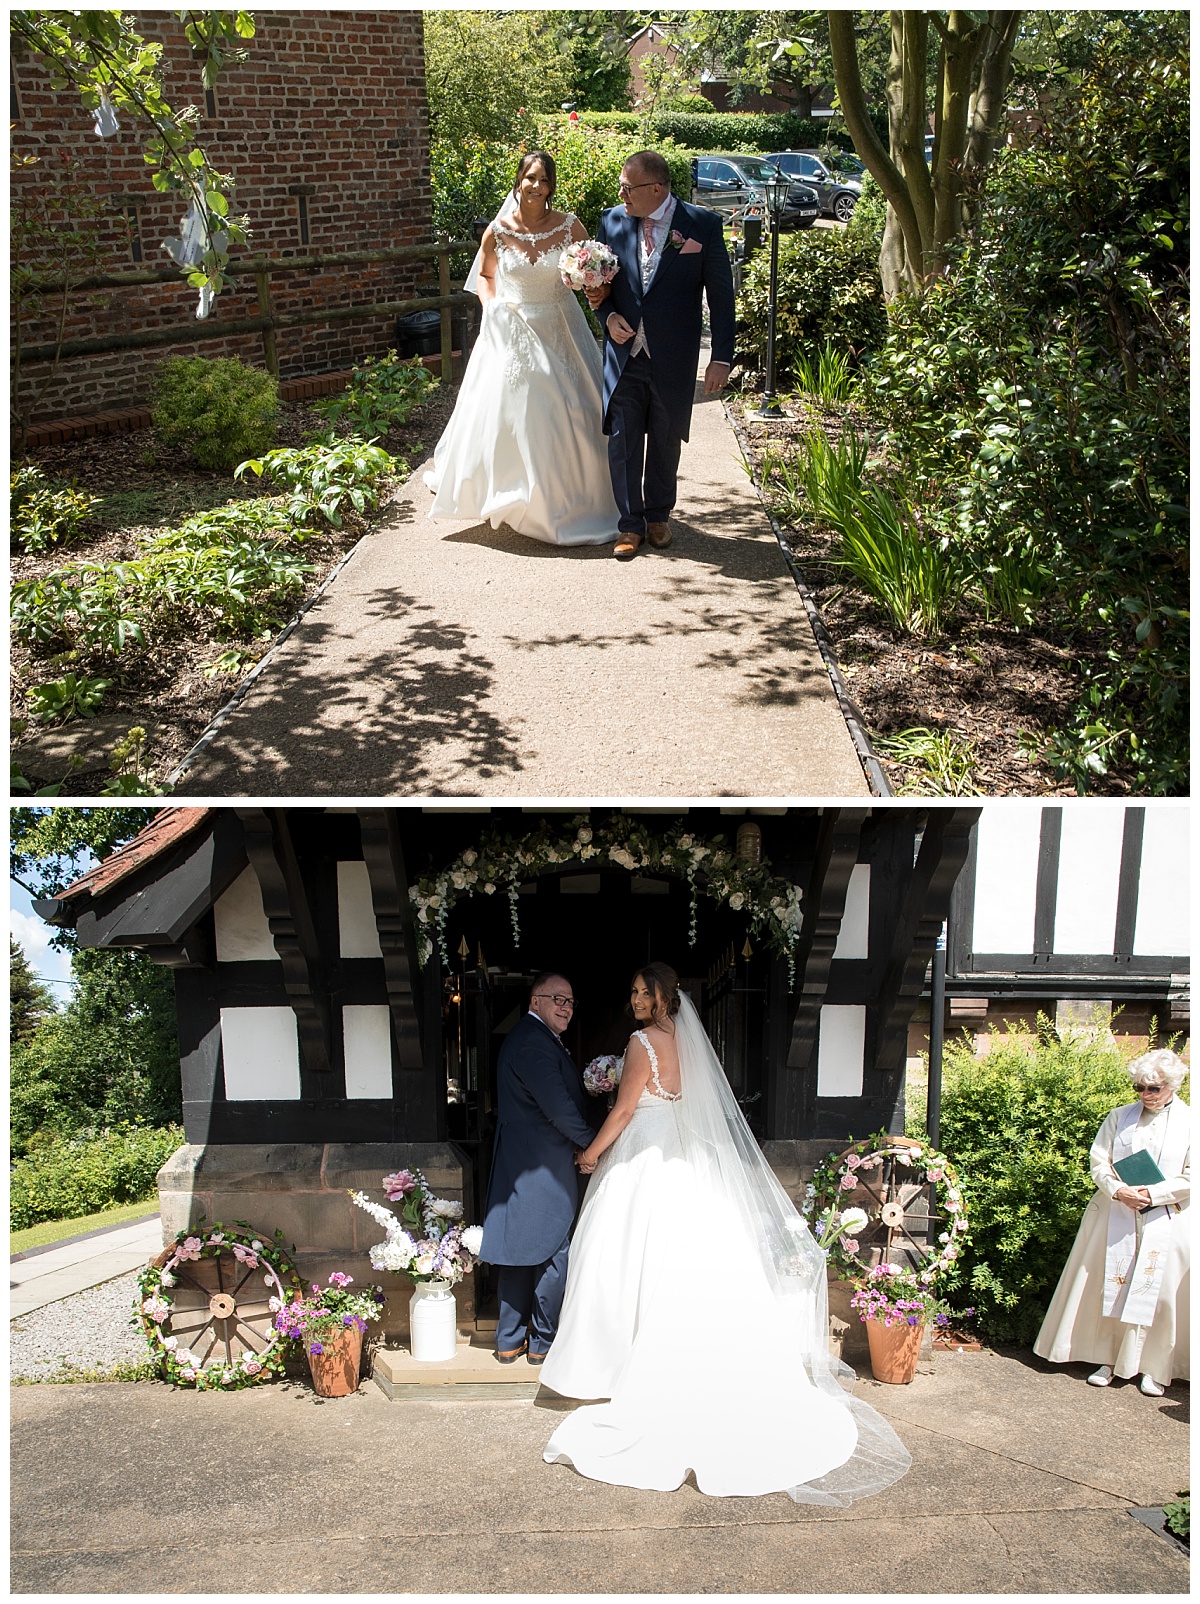 Wedding Photography Manchester - Melissa and Stuarts Mere Golf Resort And Spa Wedding Day 30